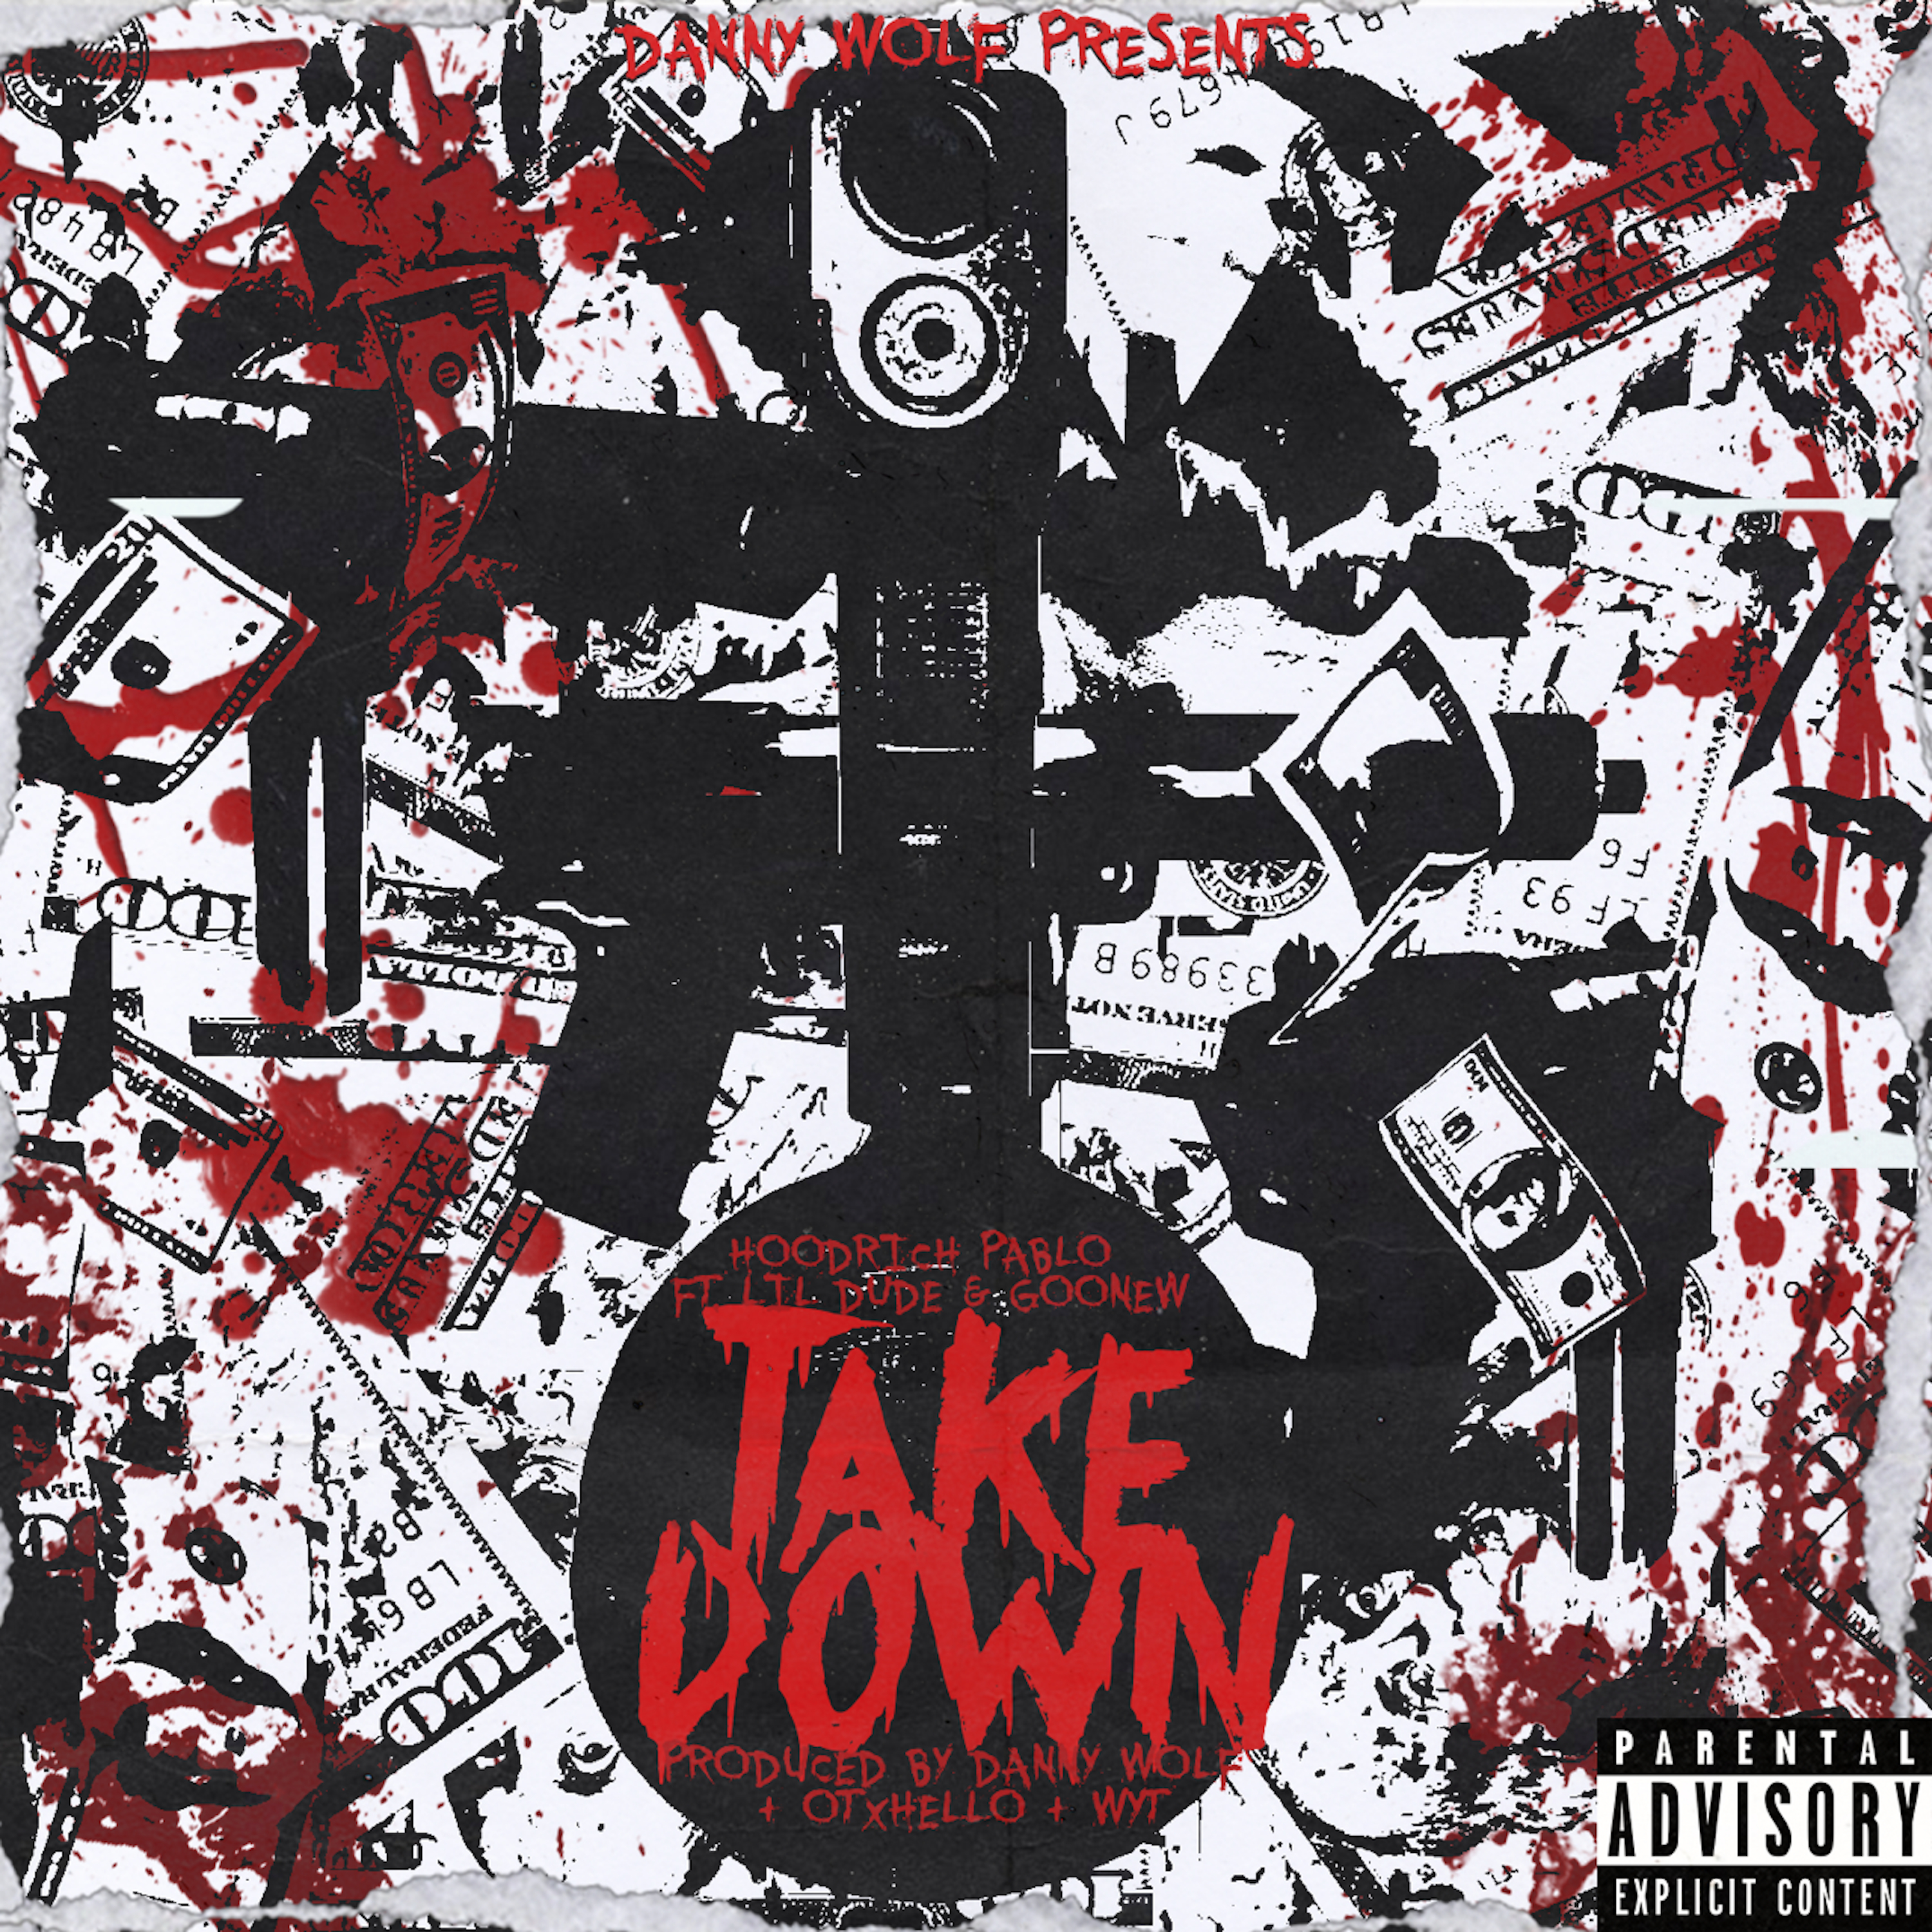 Take Down (feat. Lil Dude & Goonew)